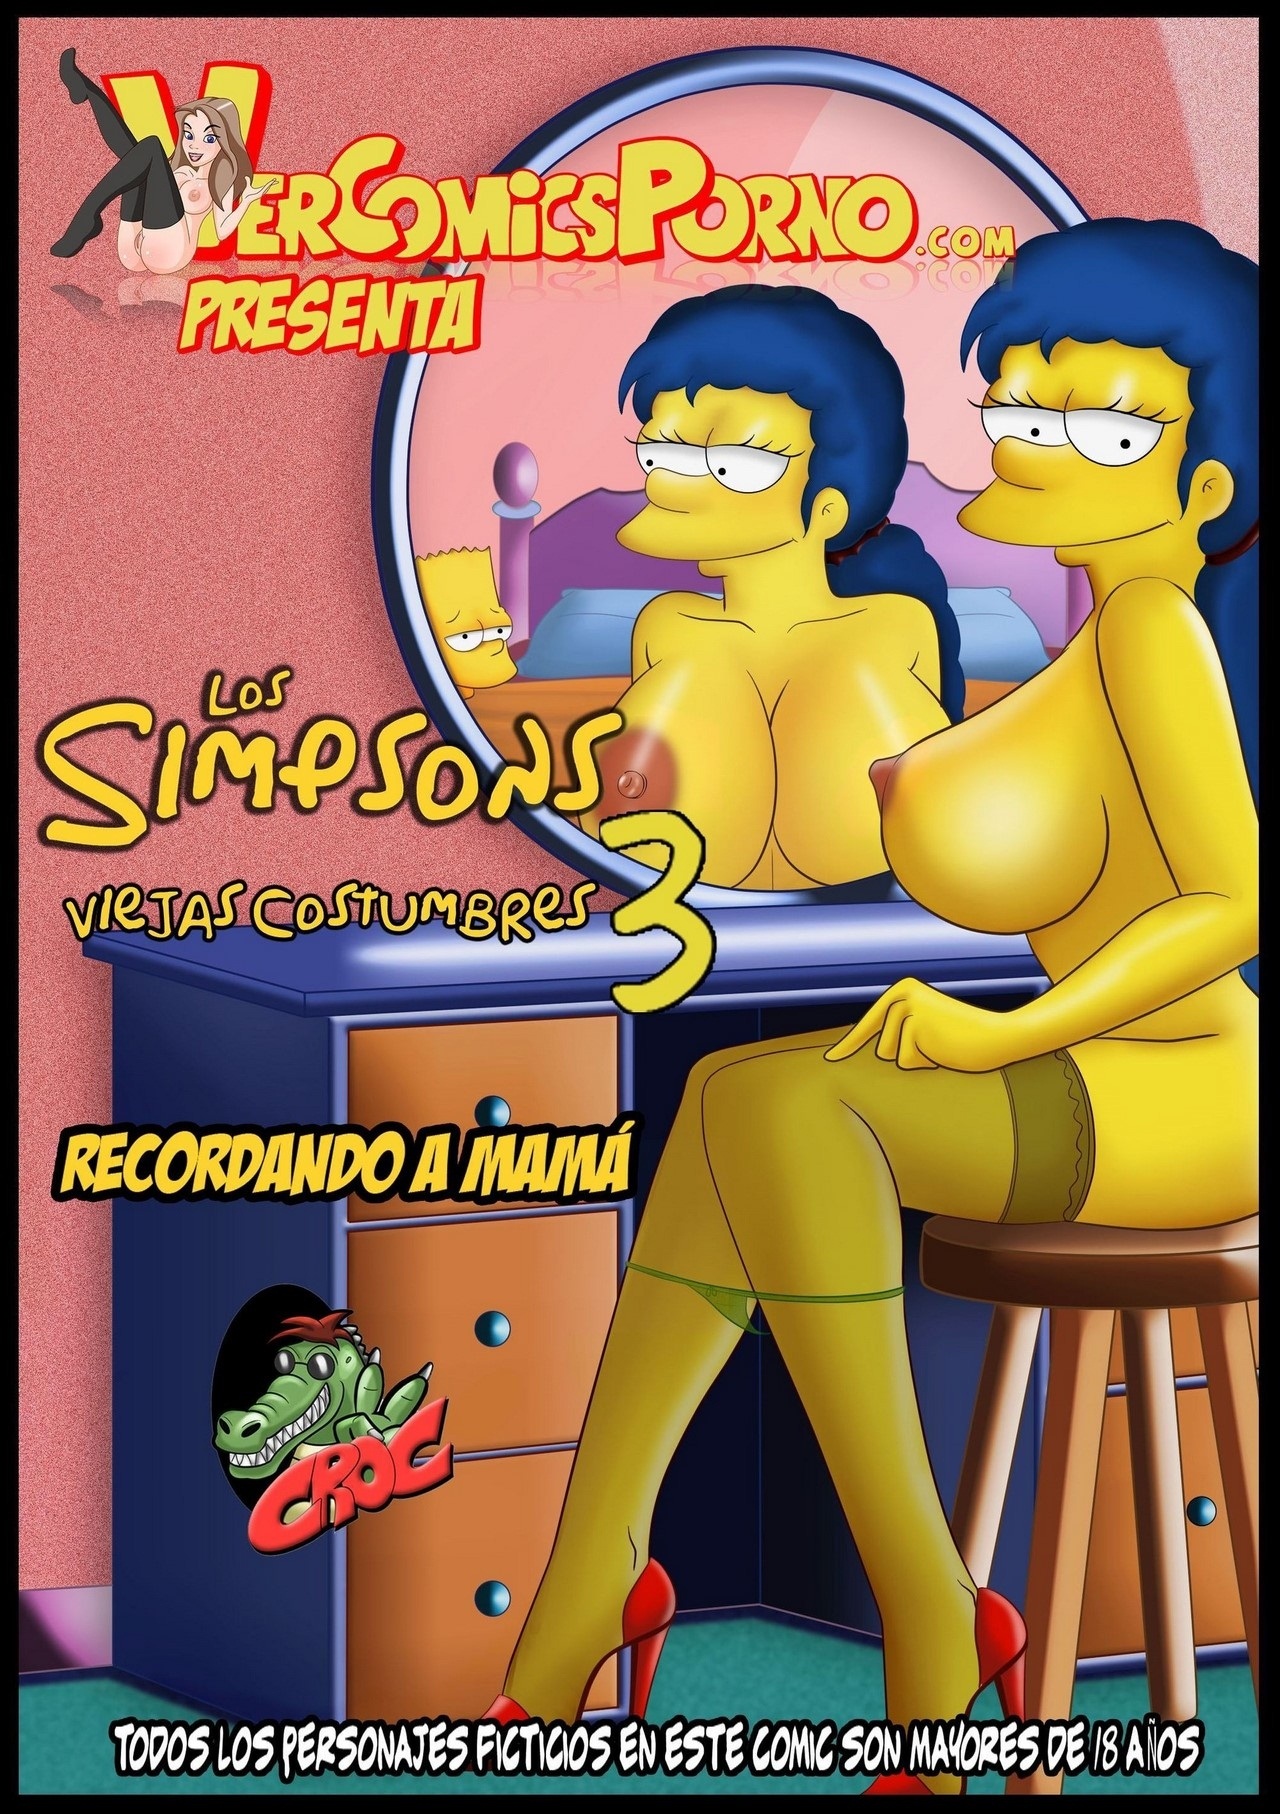 The Simpsons 3 Old Habits - Remembering Mom [Croc]